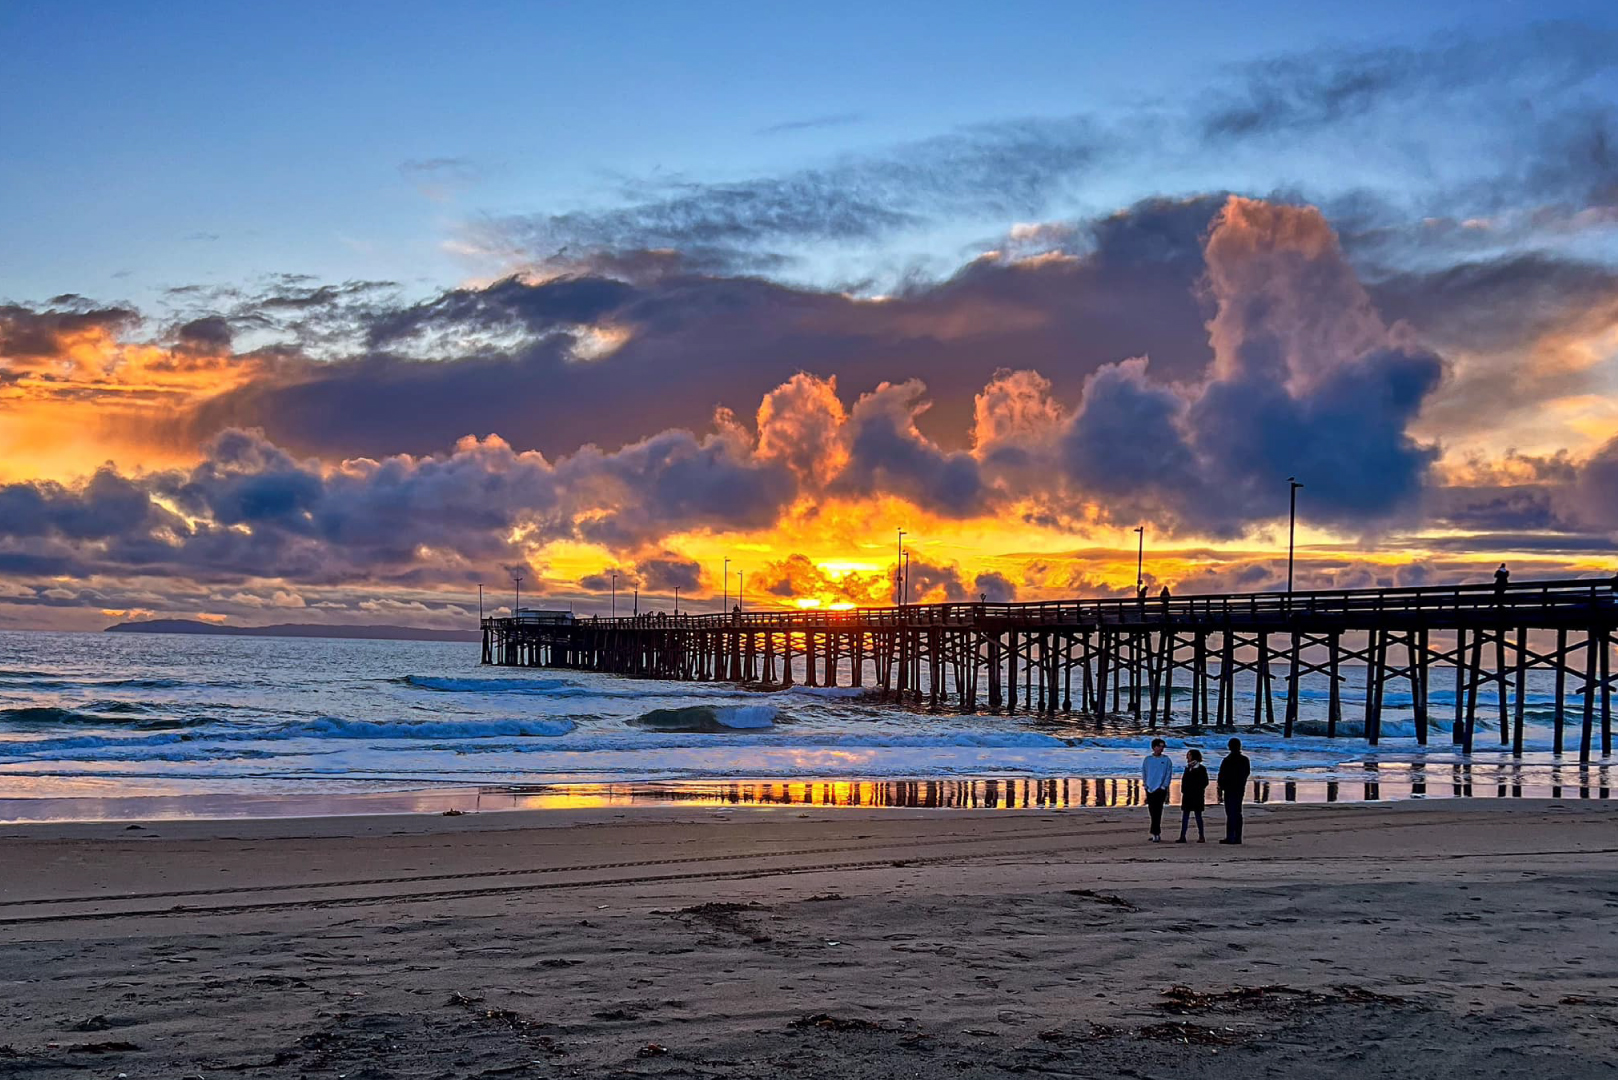 A spectacular view of Balboa Pier at sunset